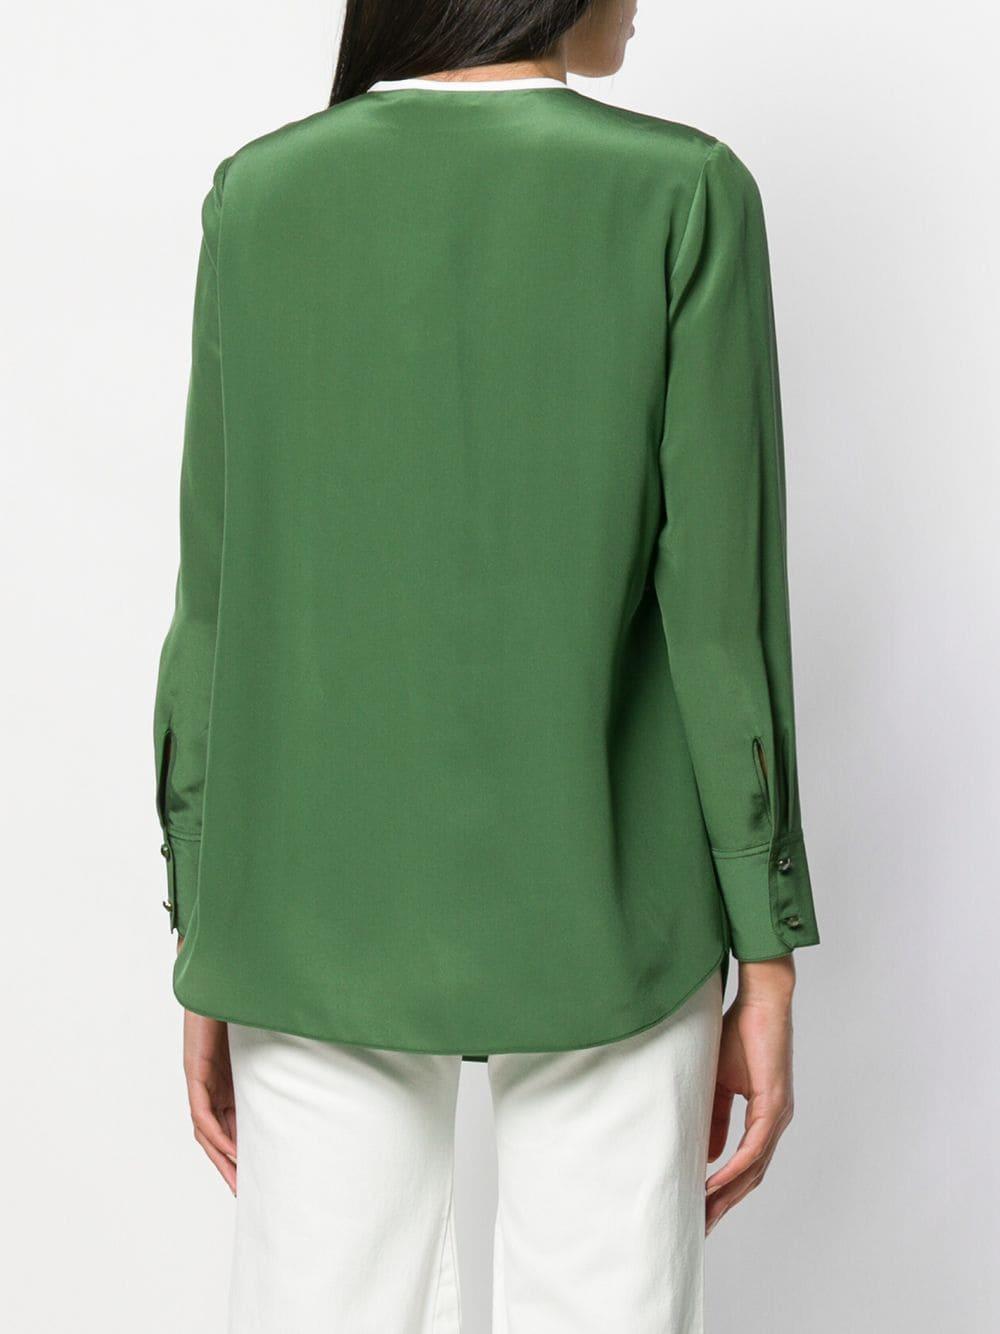 Tory Burch Cotton Tie-front Blouse in Green - Lyst